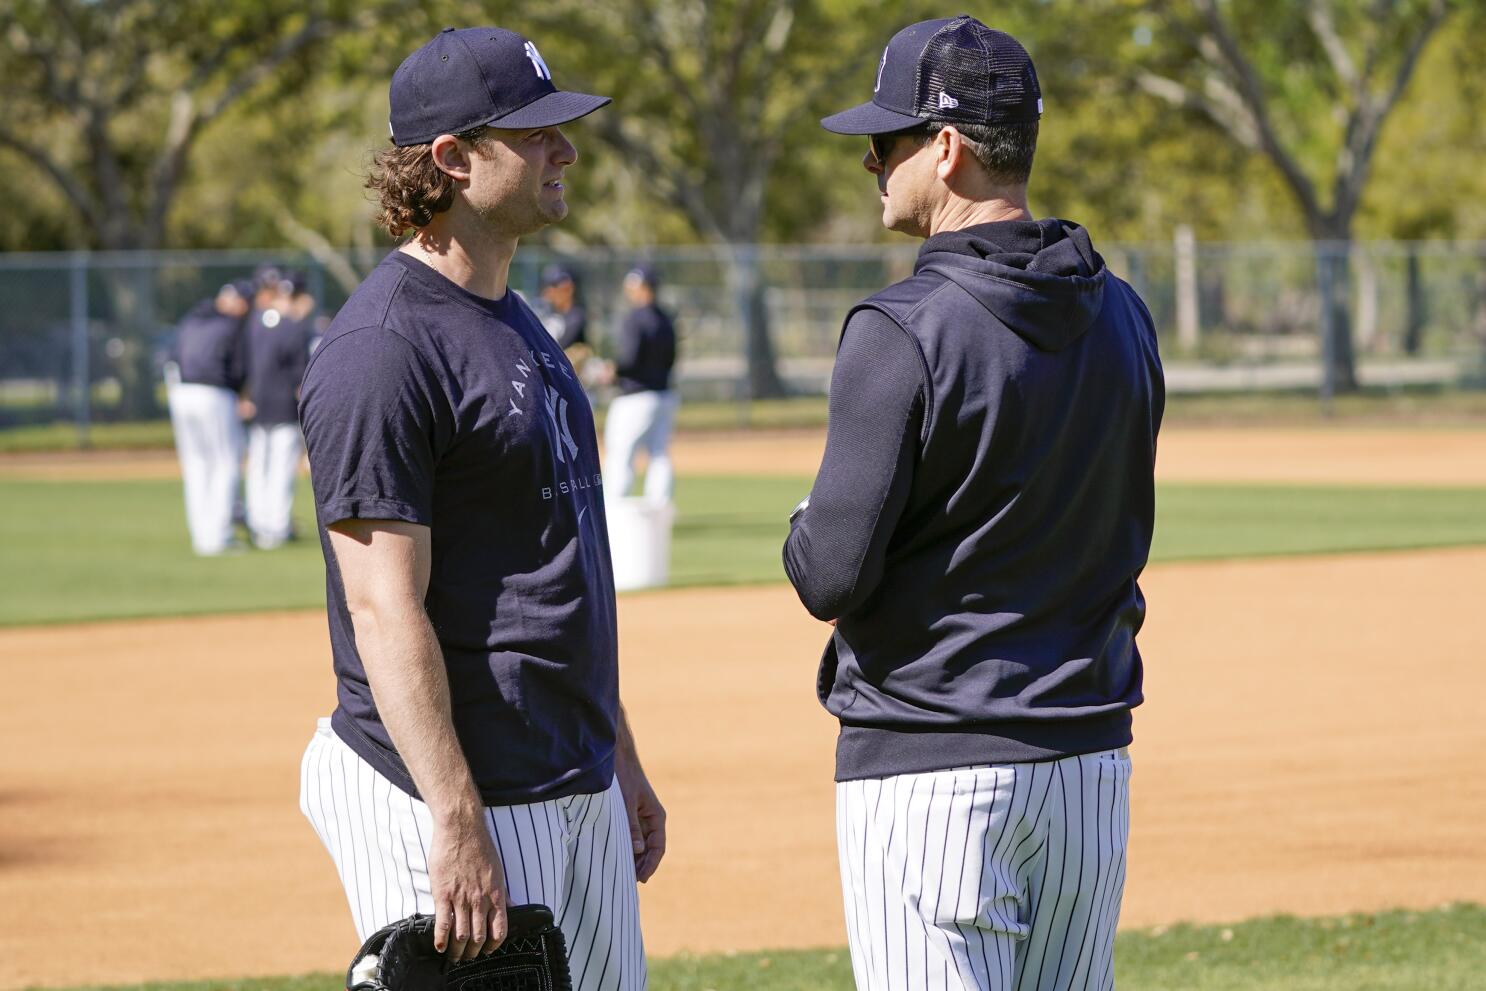 Yankees' Gerrit Cole has another strong spring training start